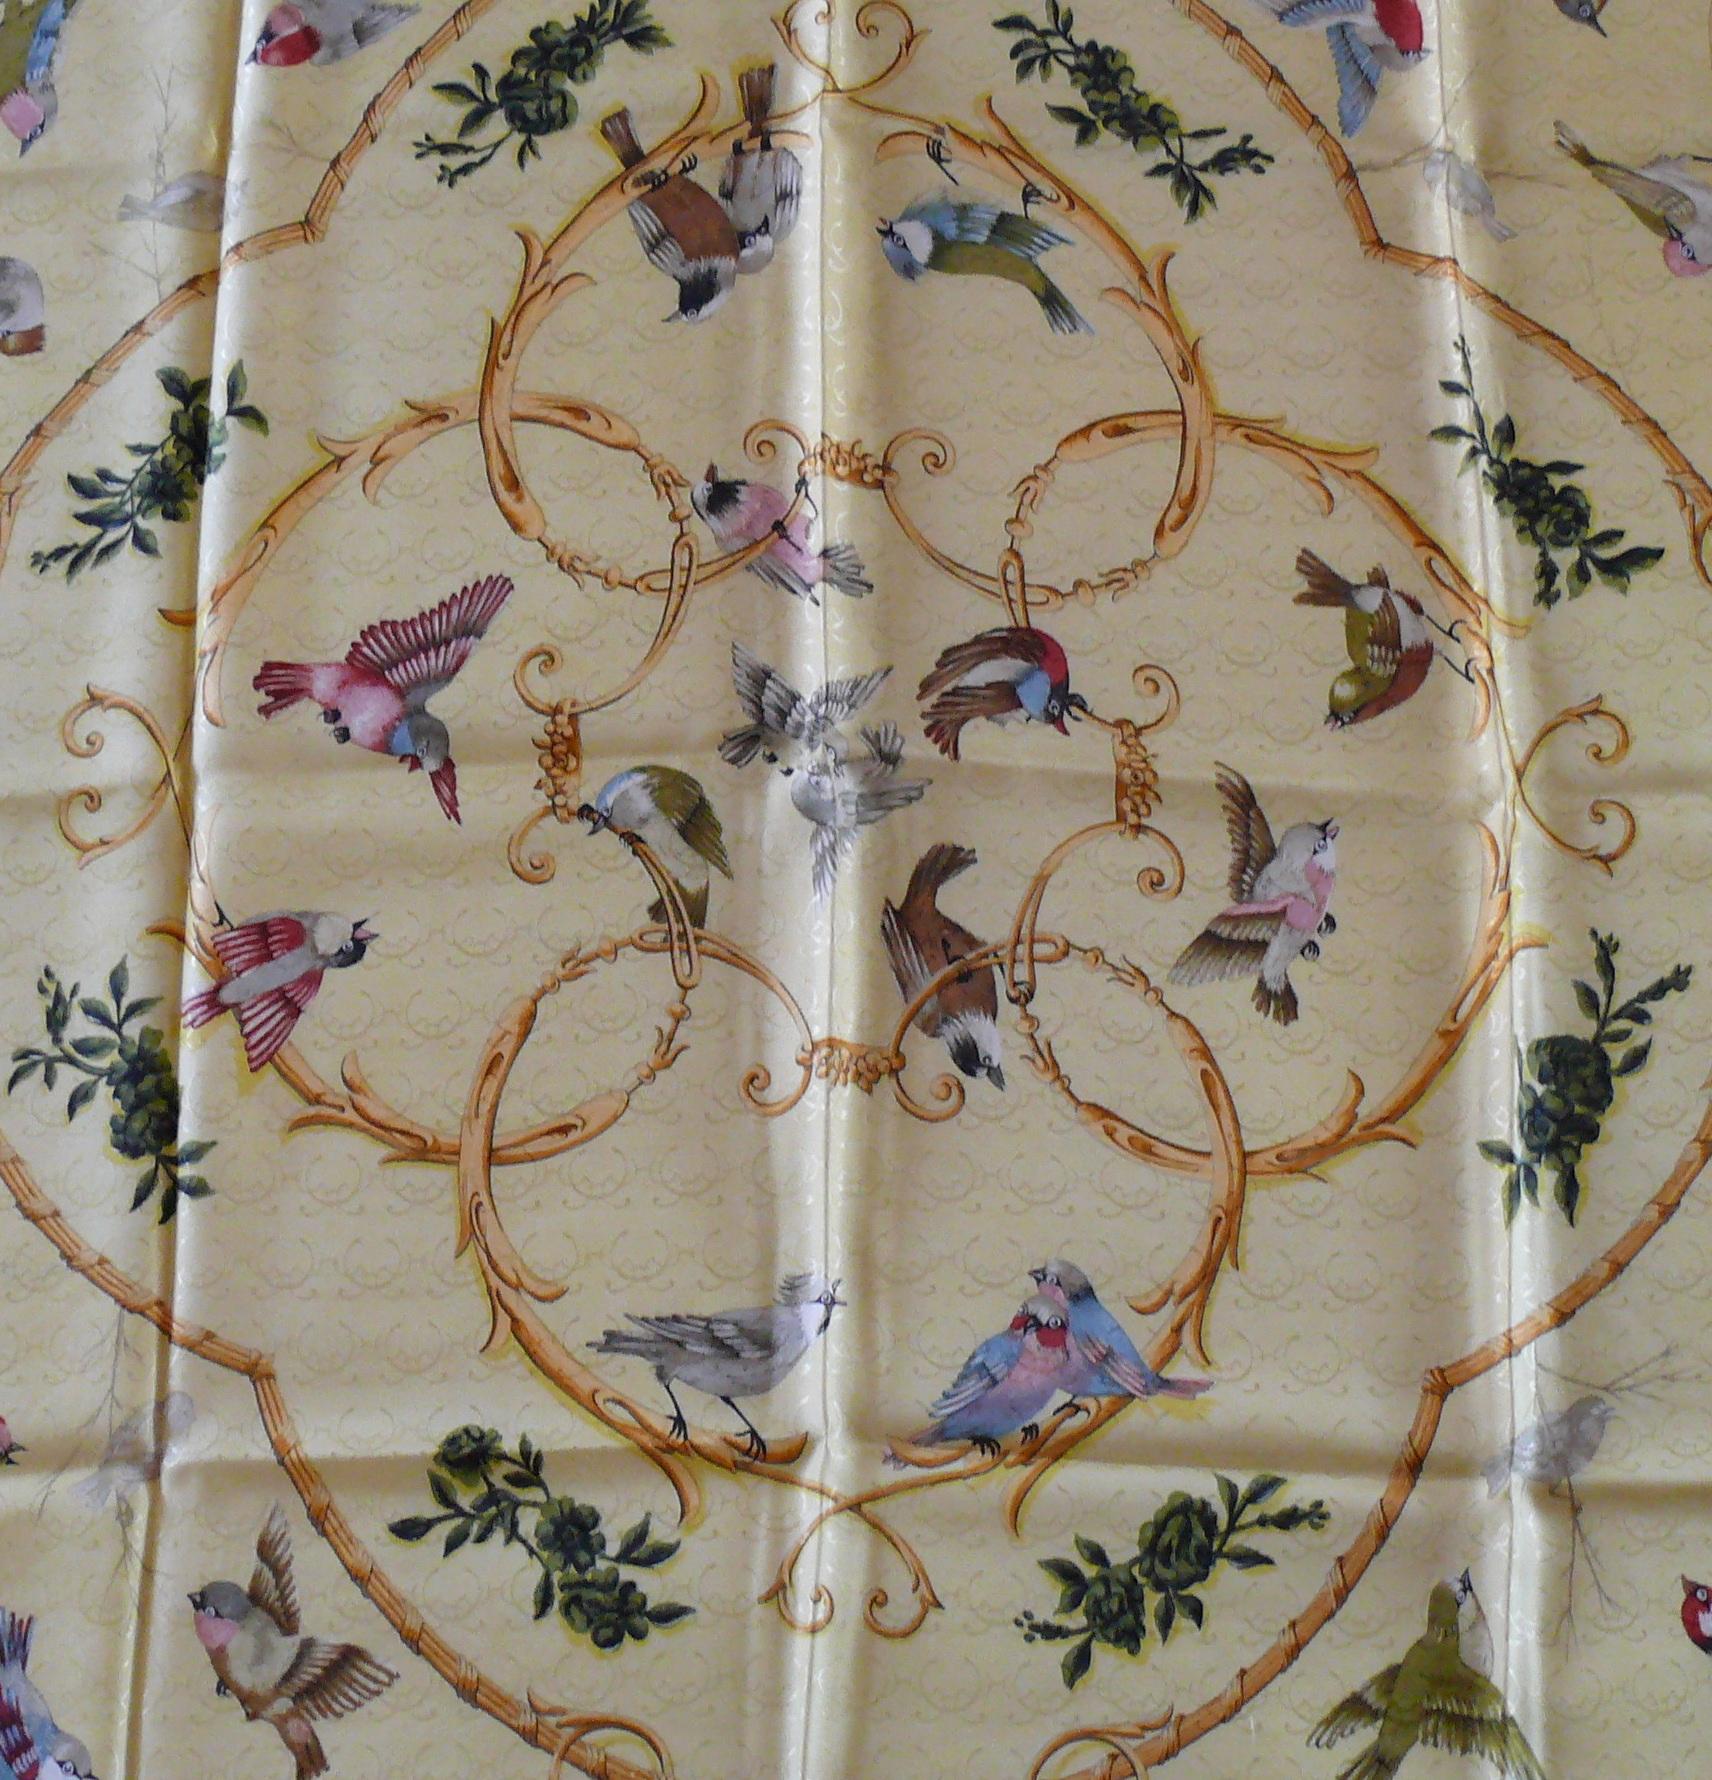 HERMES vintage jacquard silk carré scarf LA CLE DES CHAMPS, designed by FRANCOISE FACONNET, featuring birds adorned with gold Baroque ornaments on a yellow background.

First 1965 edition.

Marked HERMES PARIS
Signed FR. FACONNET.

Missing